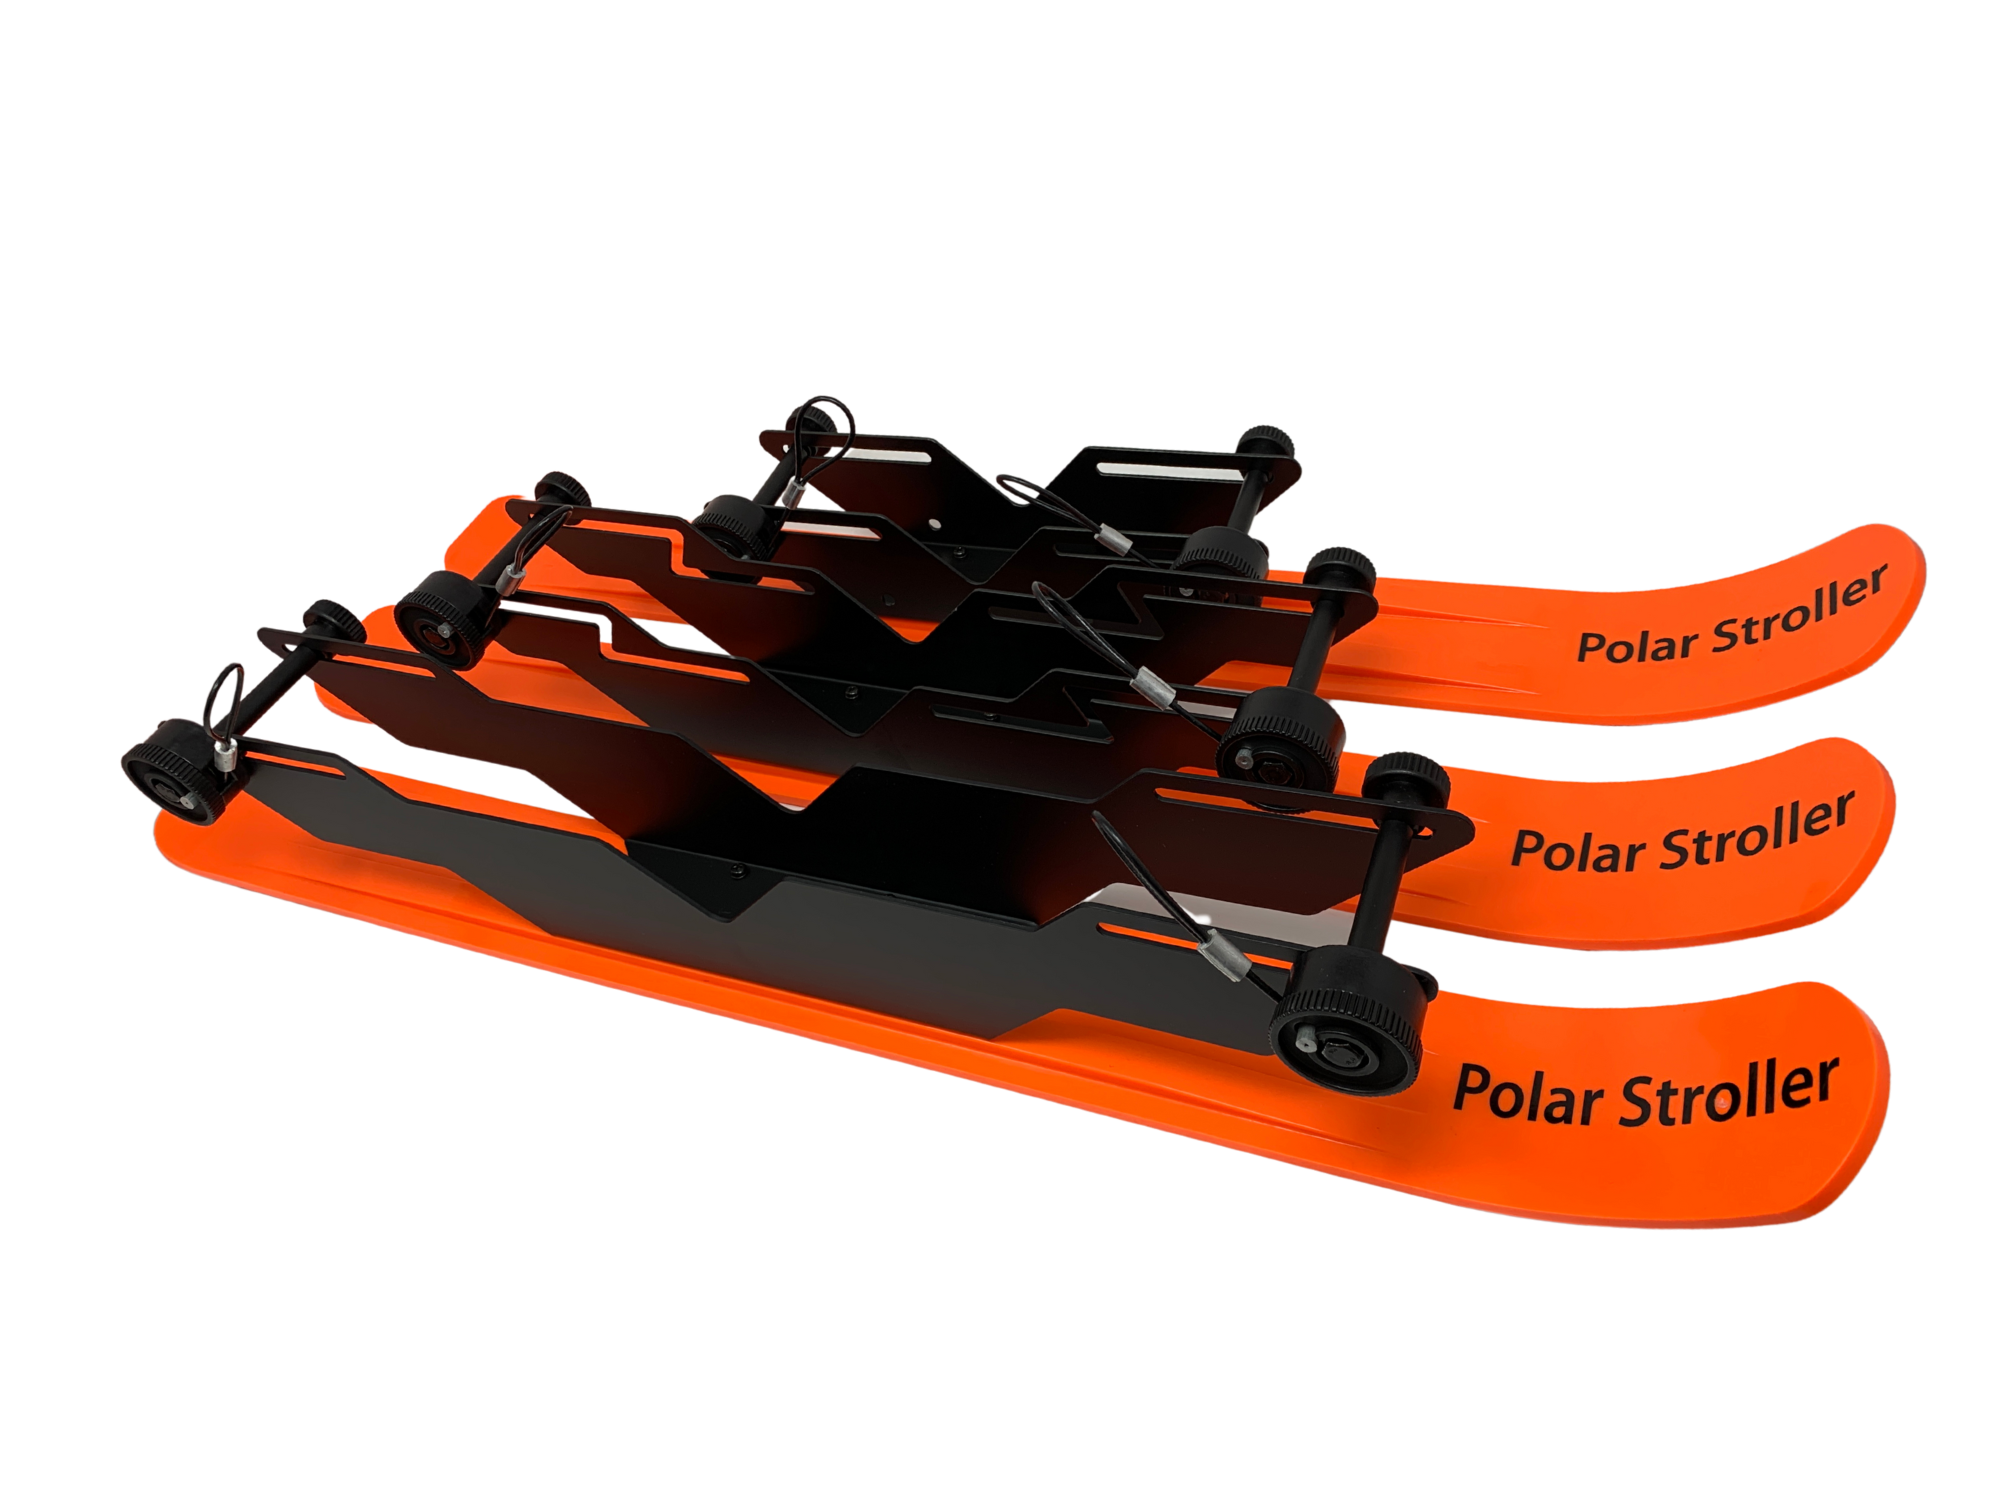 Polar Skis for people needing a single skis for large 26” wheels.